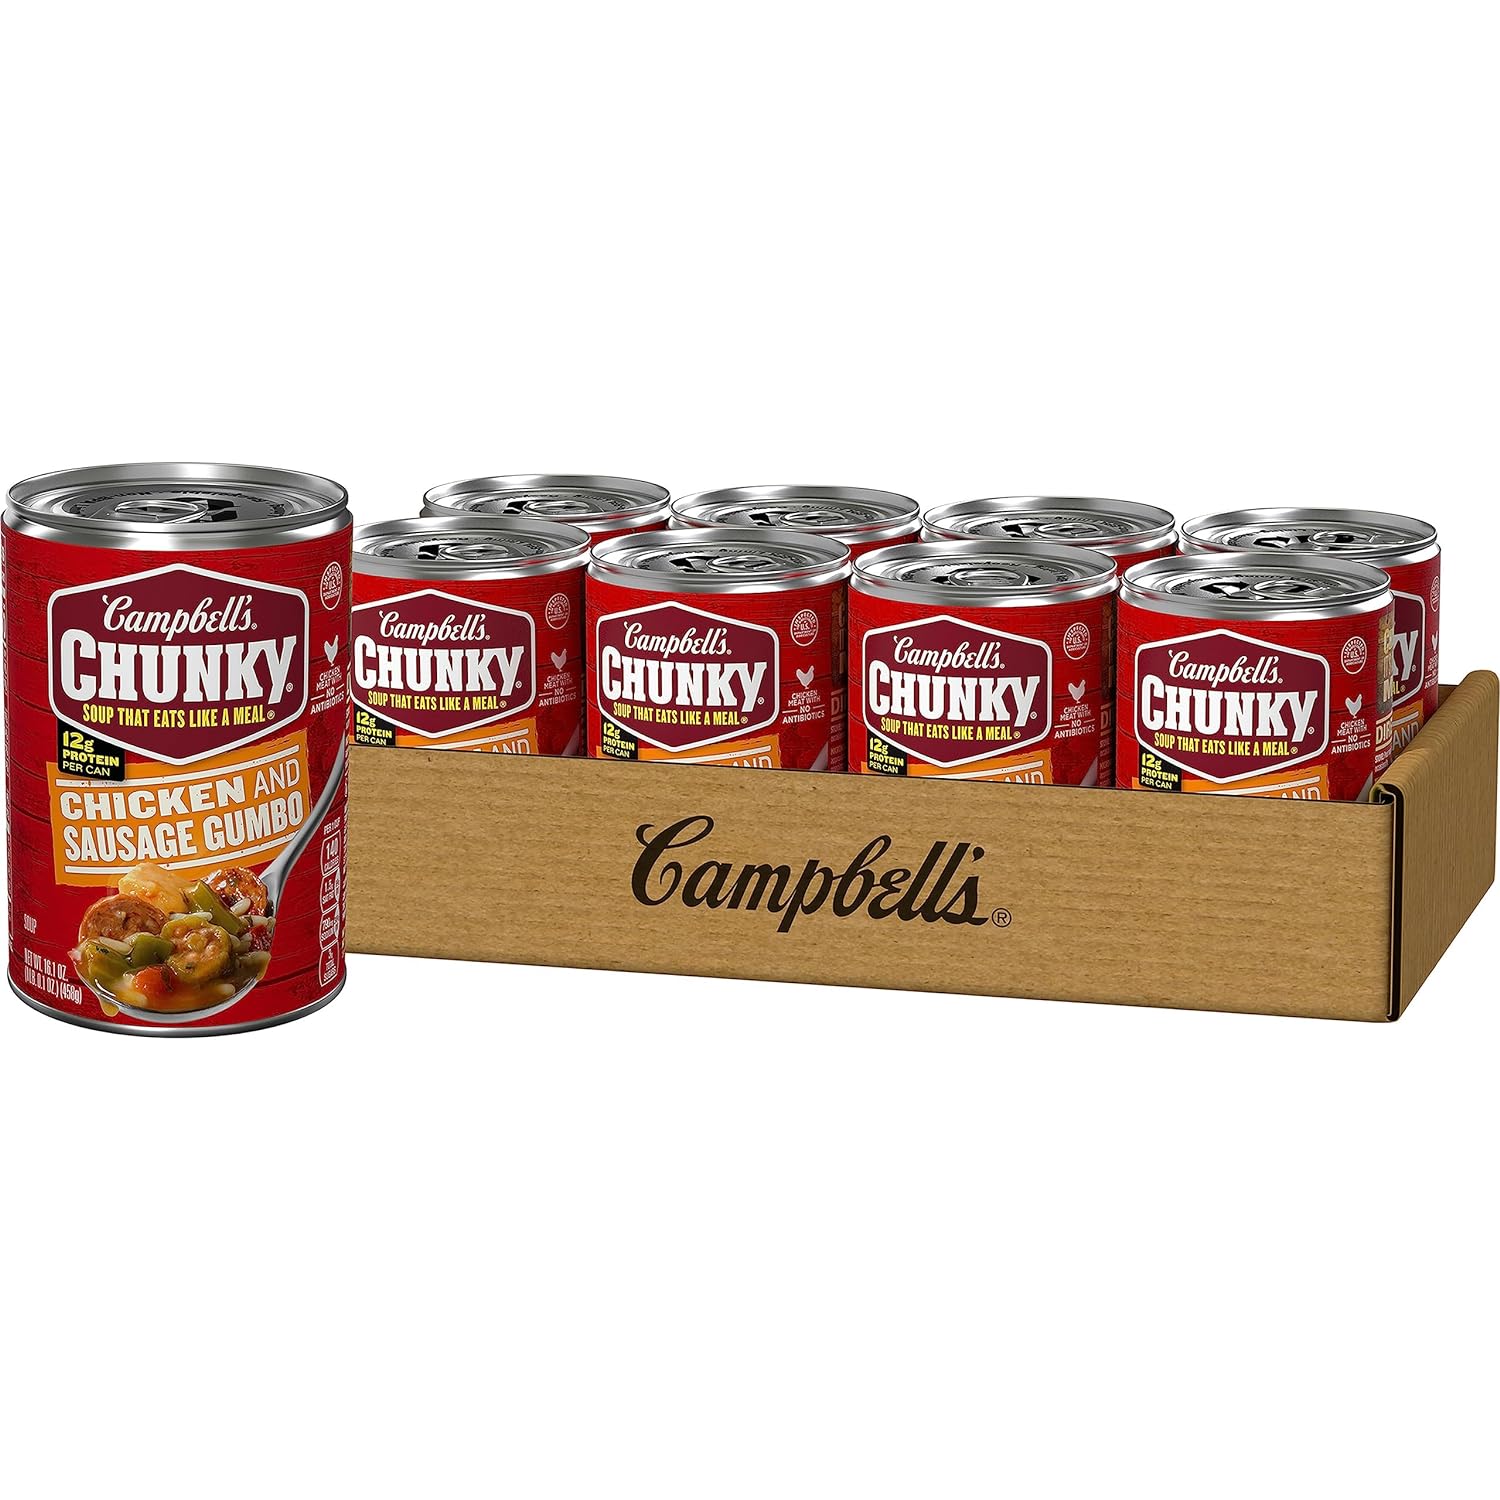 8-Count 16.1-Oz Campbell’s Chunky Soup: Chicken & Sausage Gumbo $11.61 ($1.45 each), Spicy Chicken Noodle $11.74 ($1.47 each), More w/ S&S + Free Shipping w/ Prime or on $35+